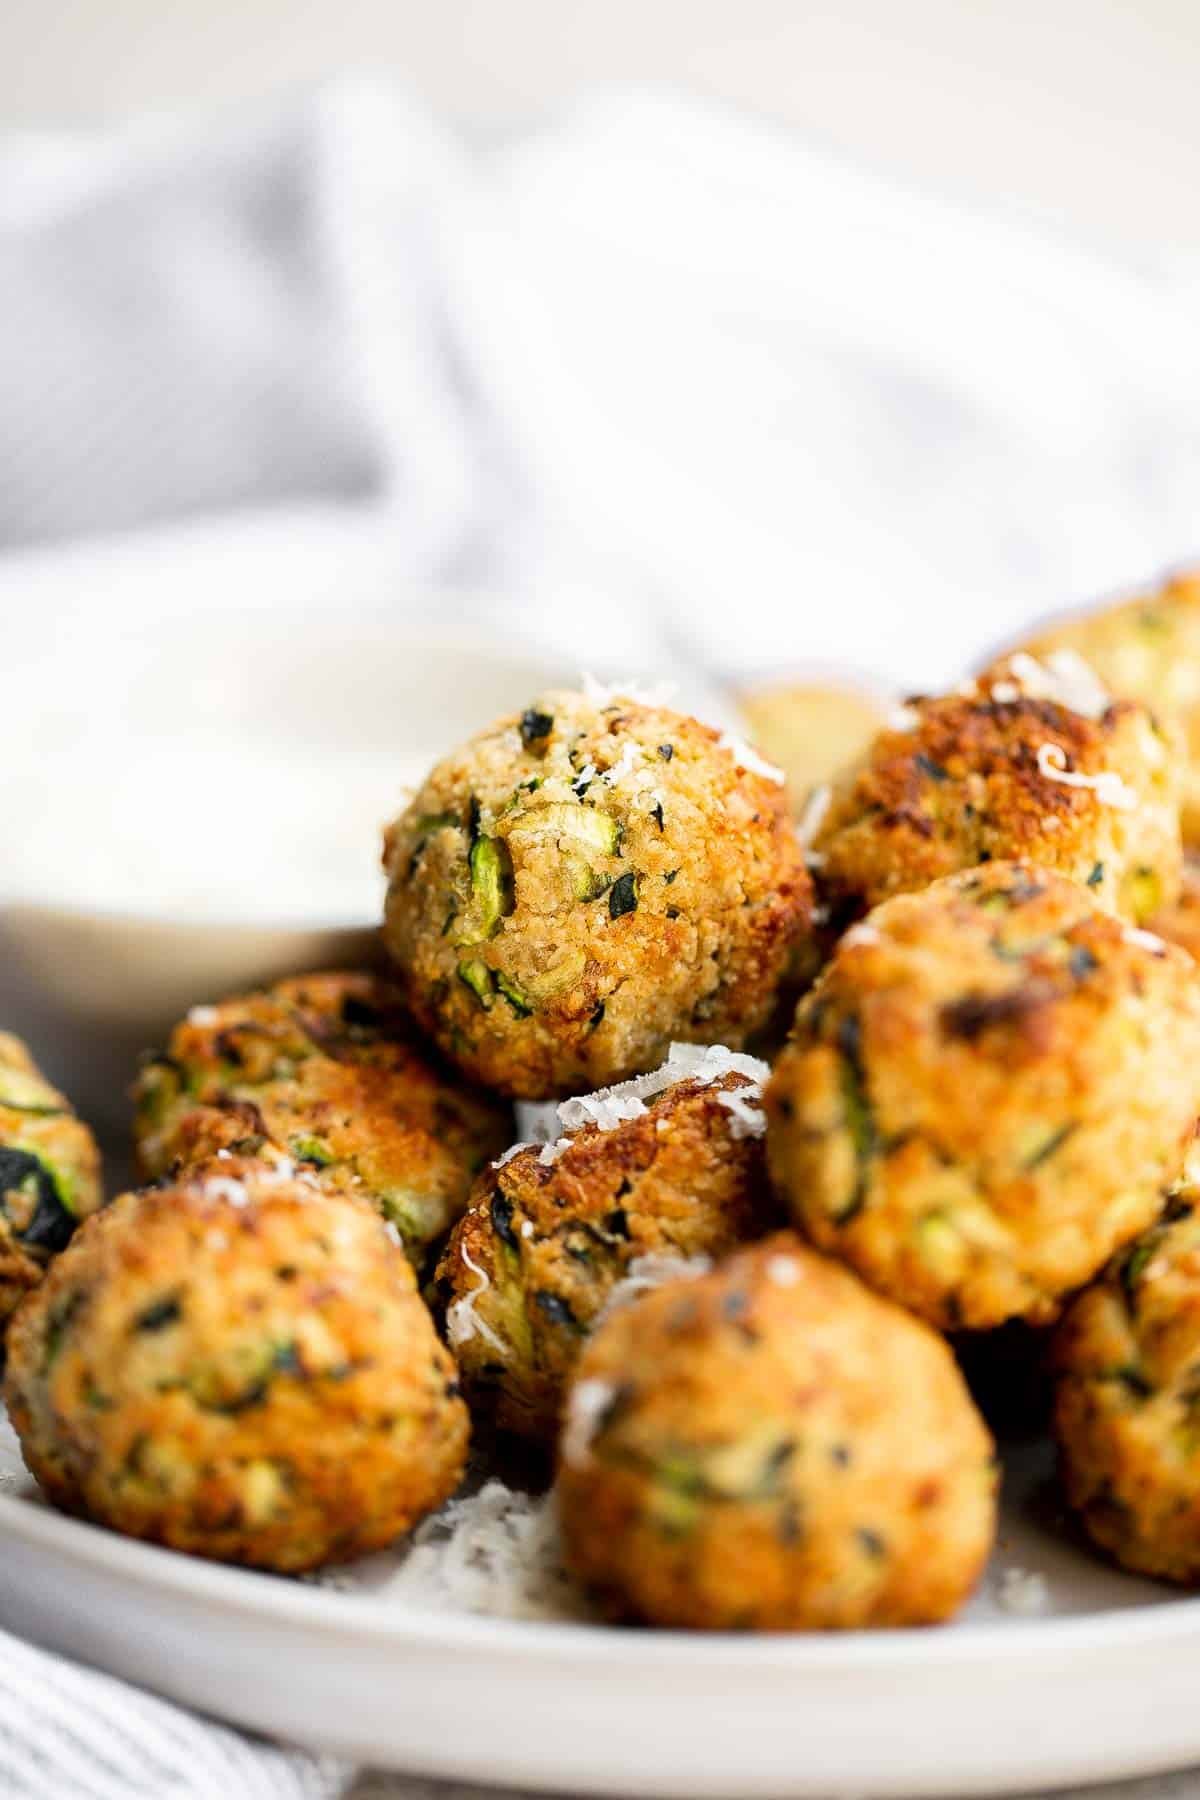 Zucchini Bites are savory balls that are loaded with fresh zucchini. They're quick and easy to make in under 30 minutes in the air fryer or oven. | aheadofthyme.com